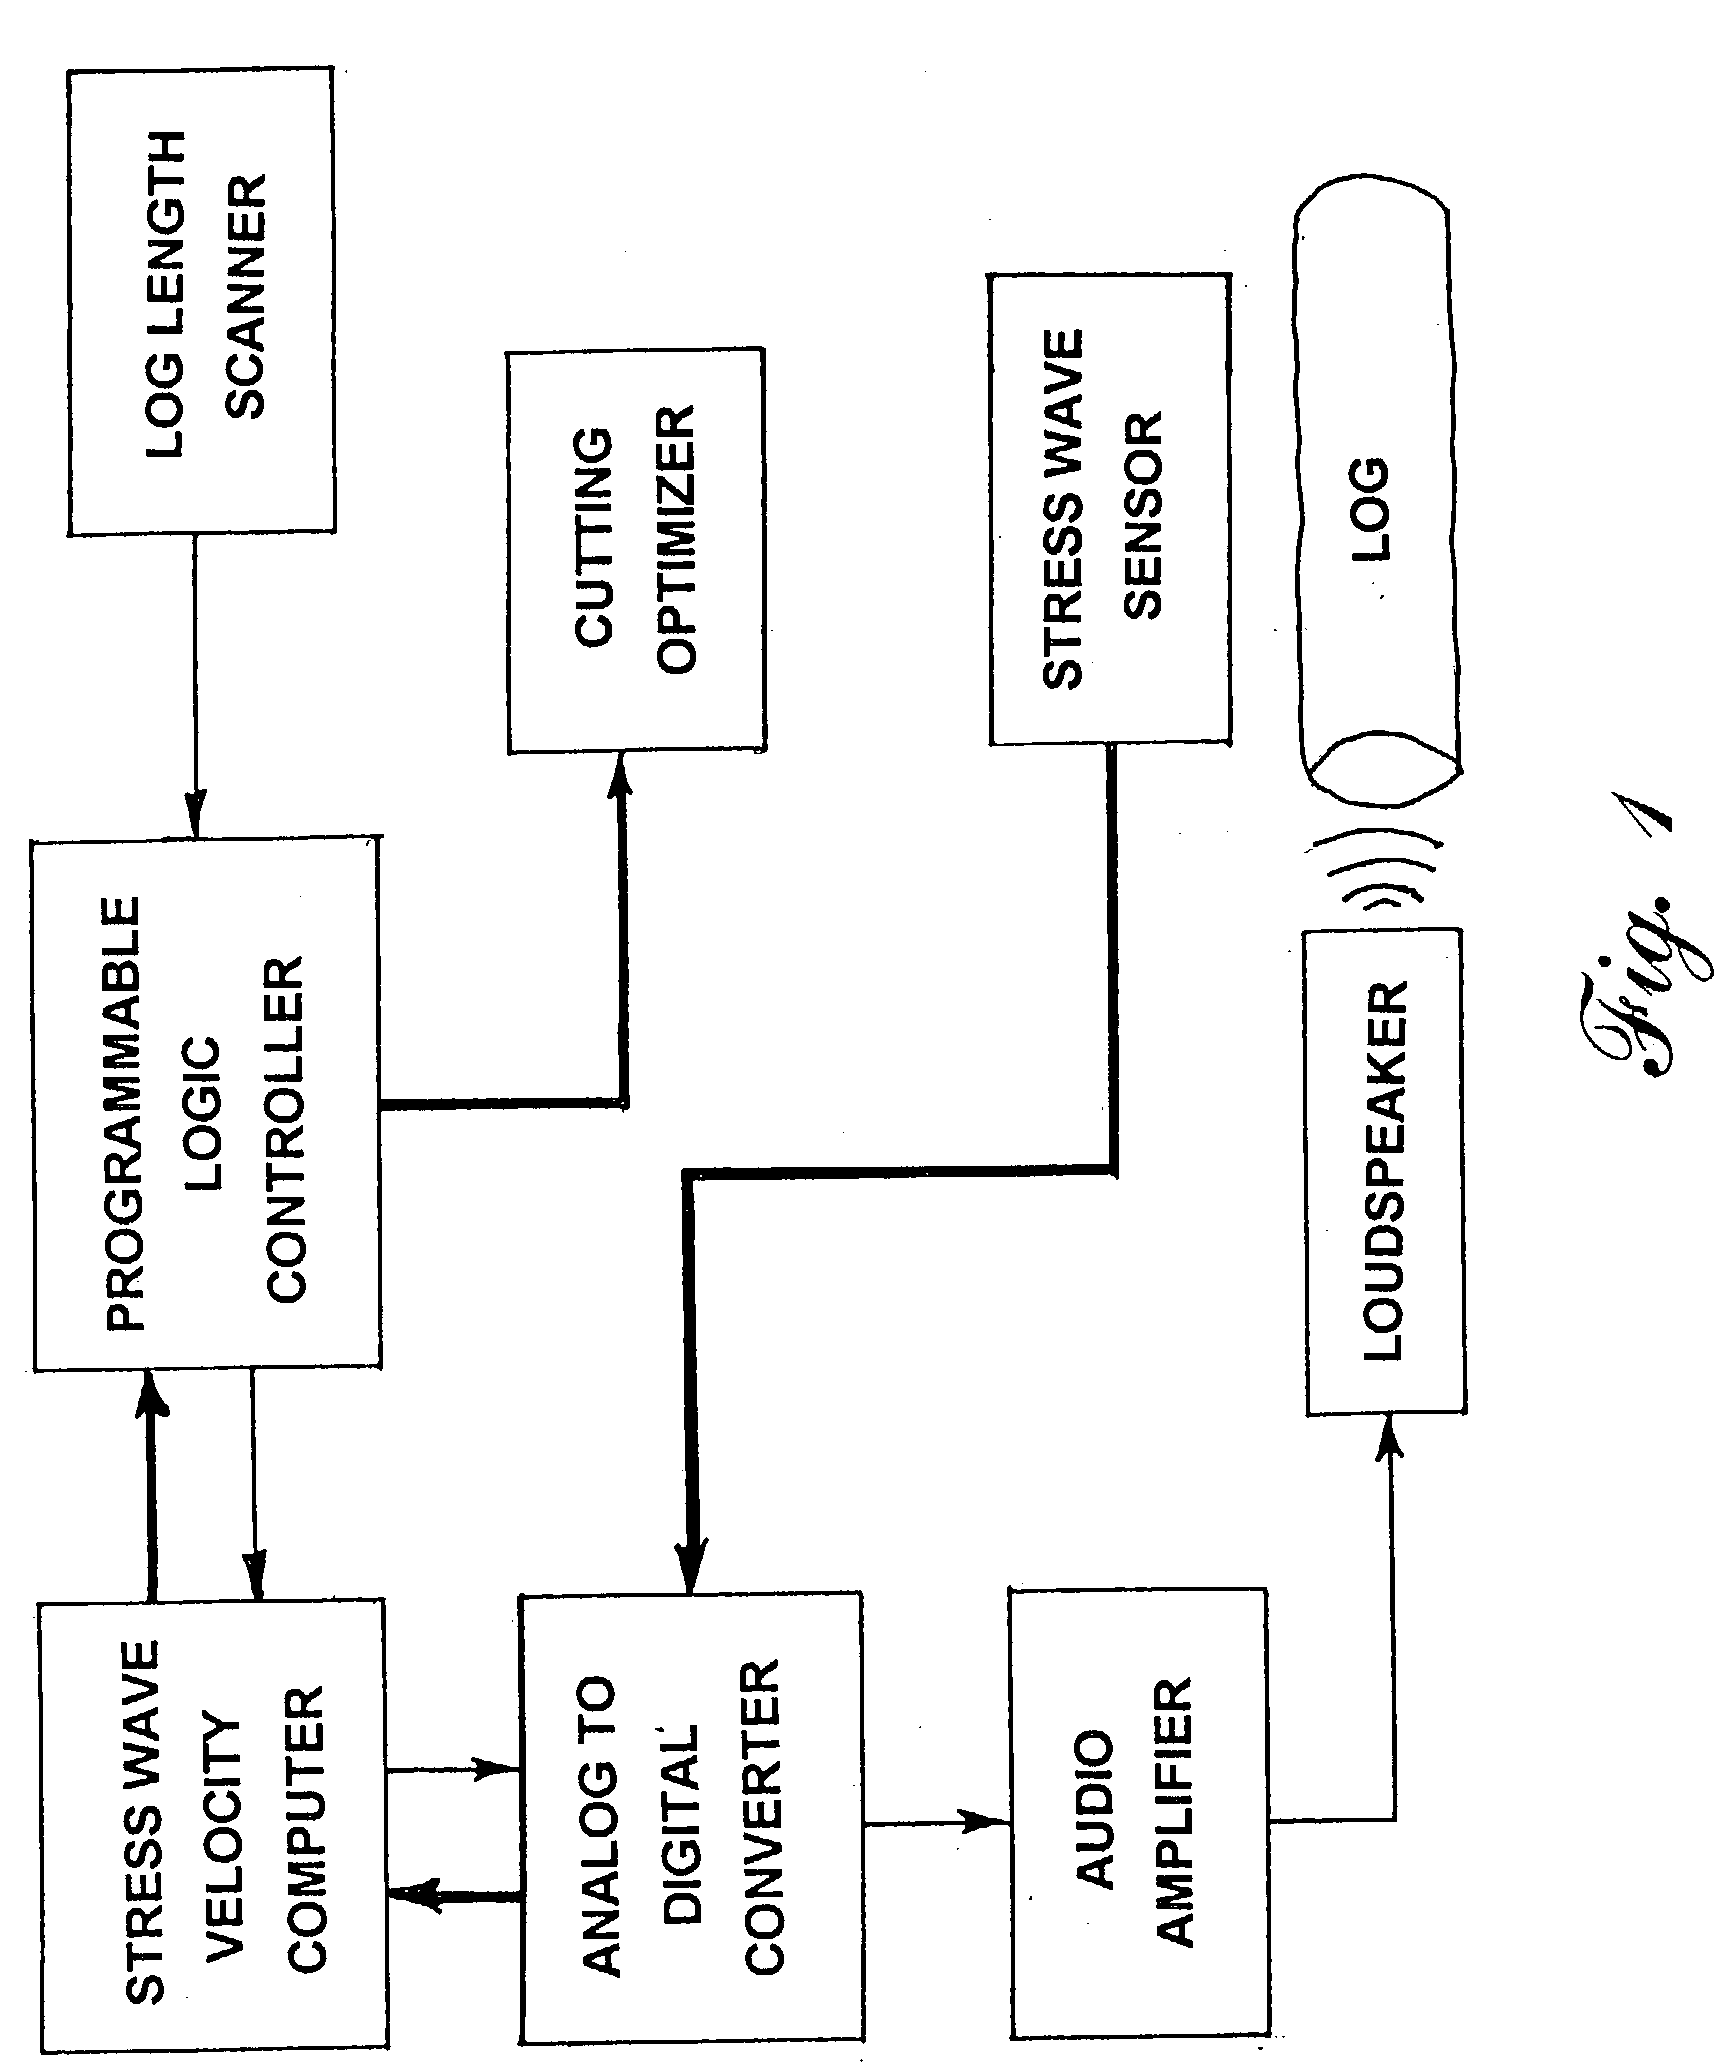 Method for determining physical properties of wood